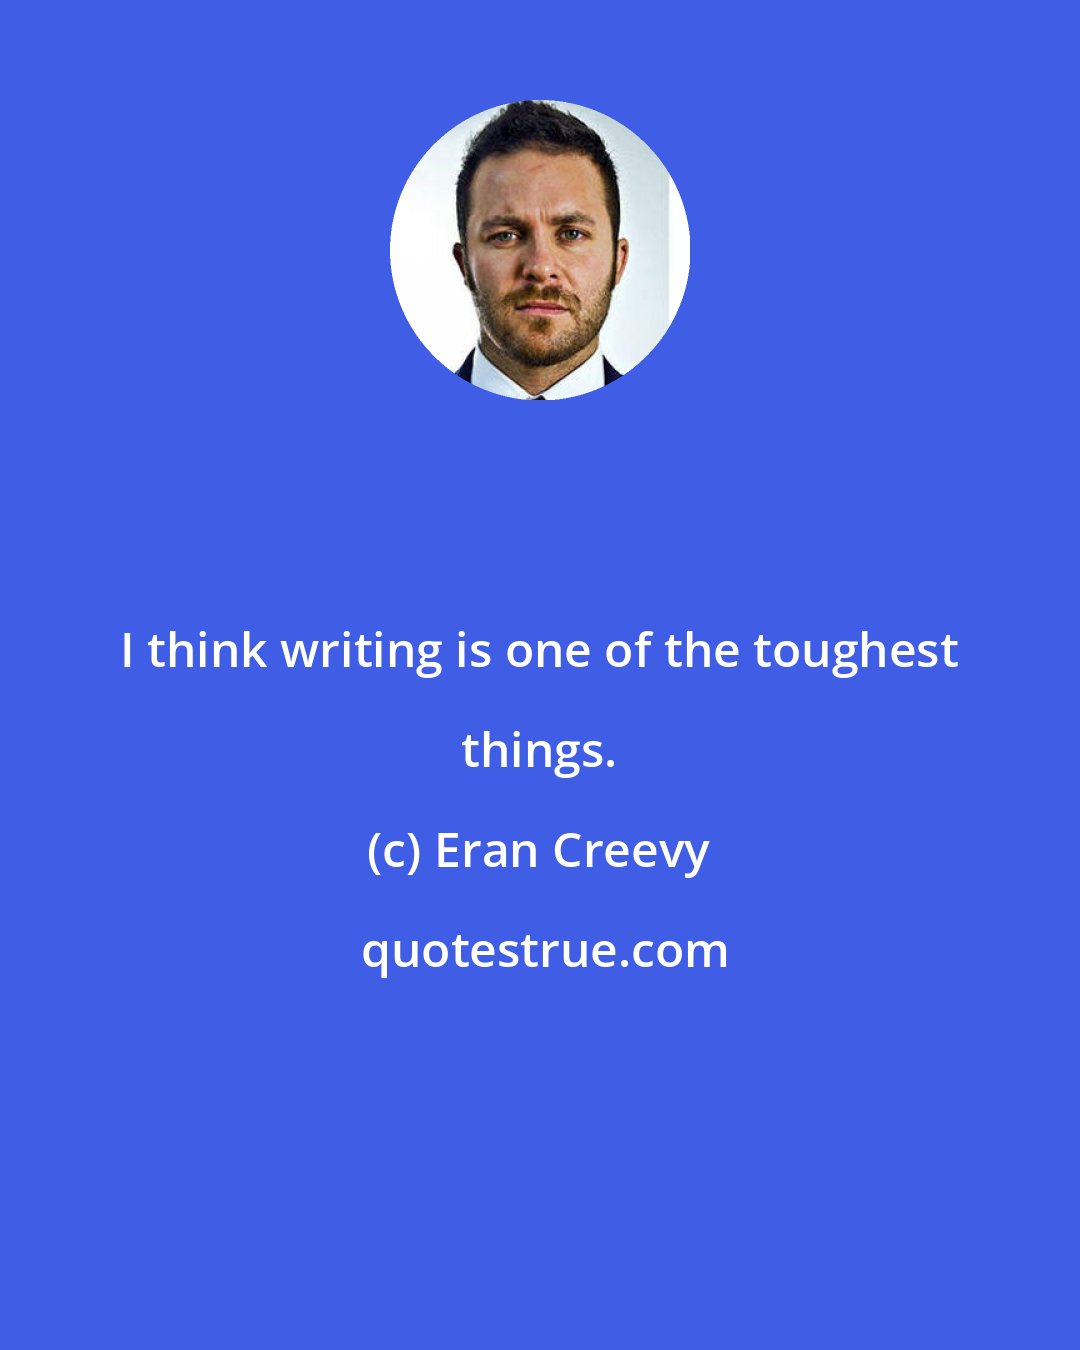 Eran Creevy: I think writing is one of the toughest things.